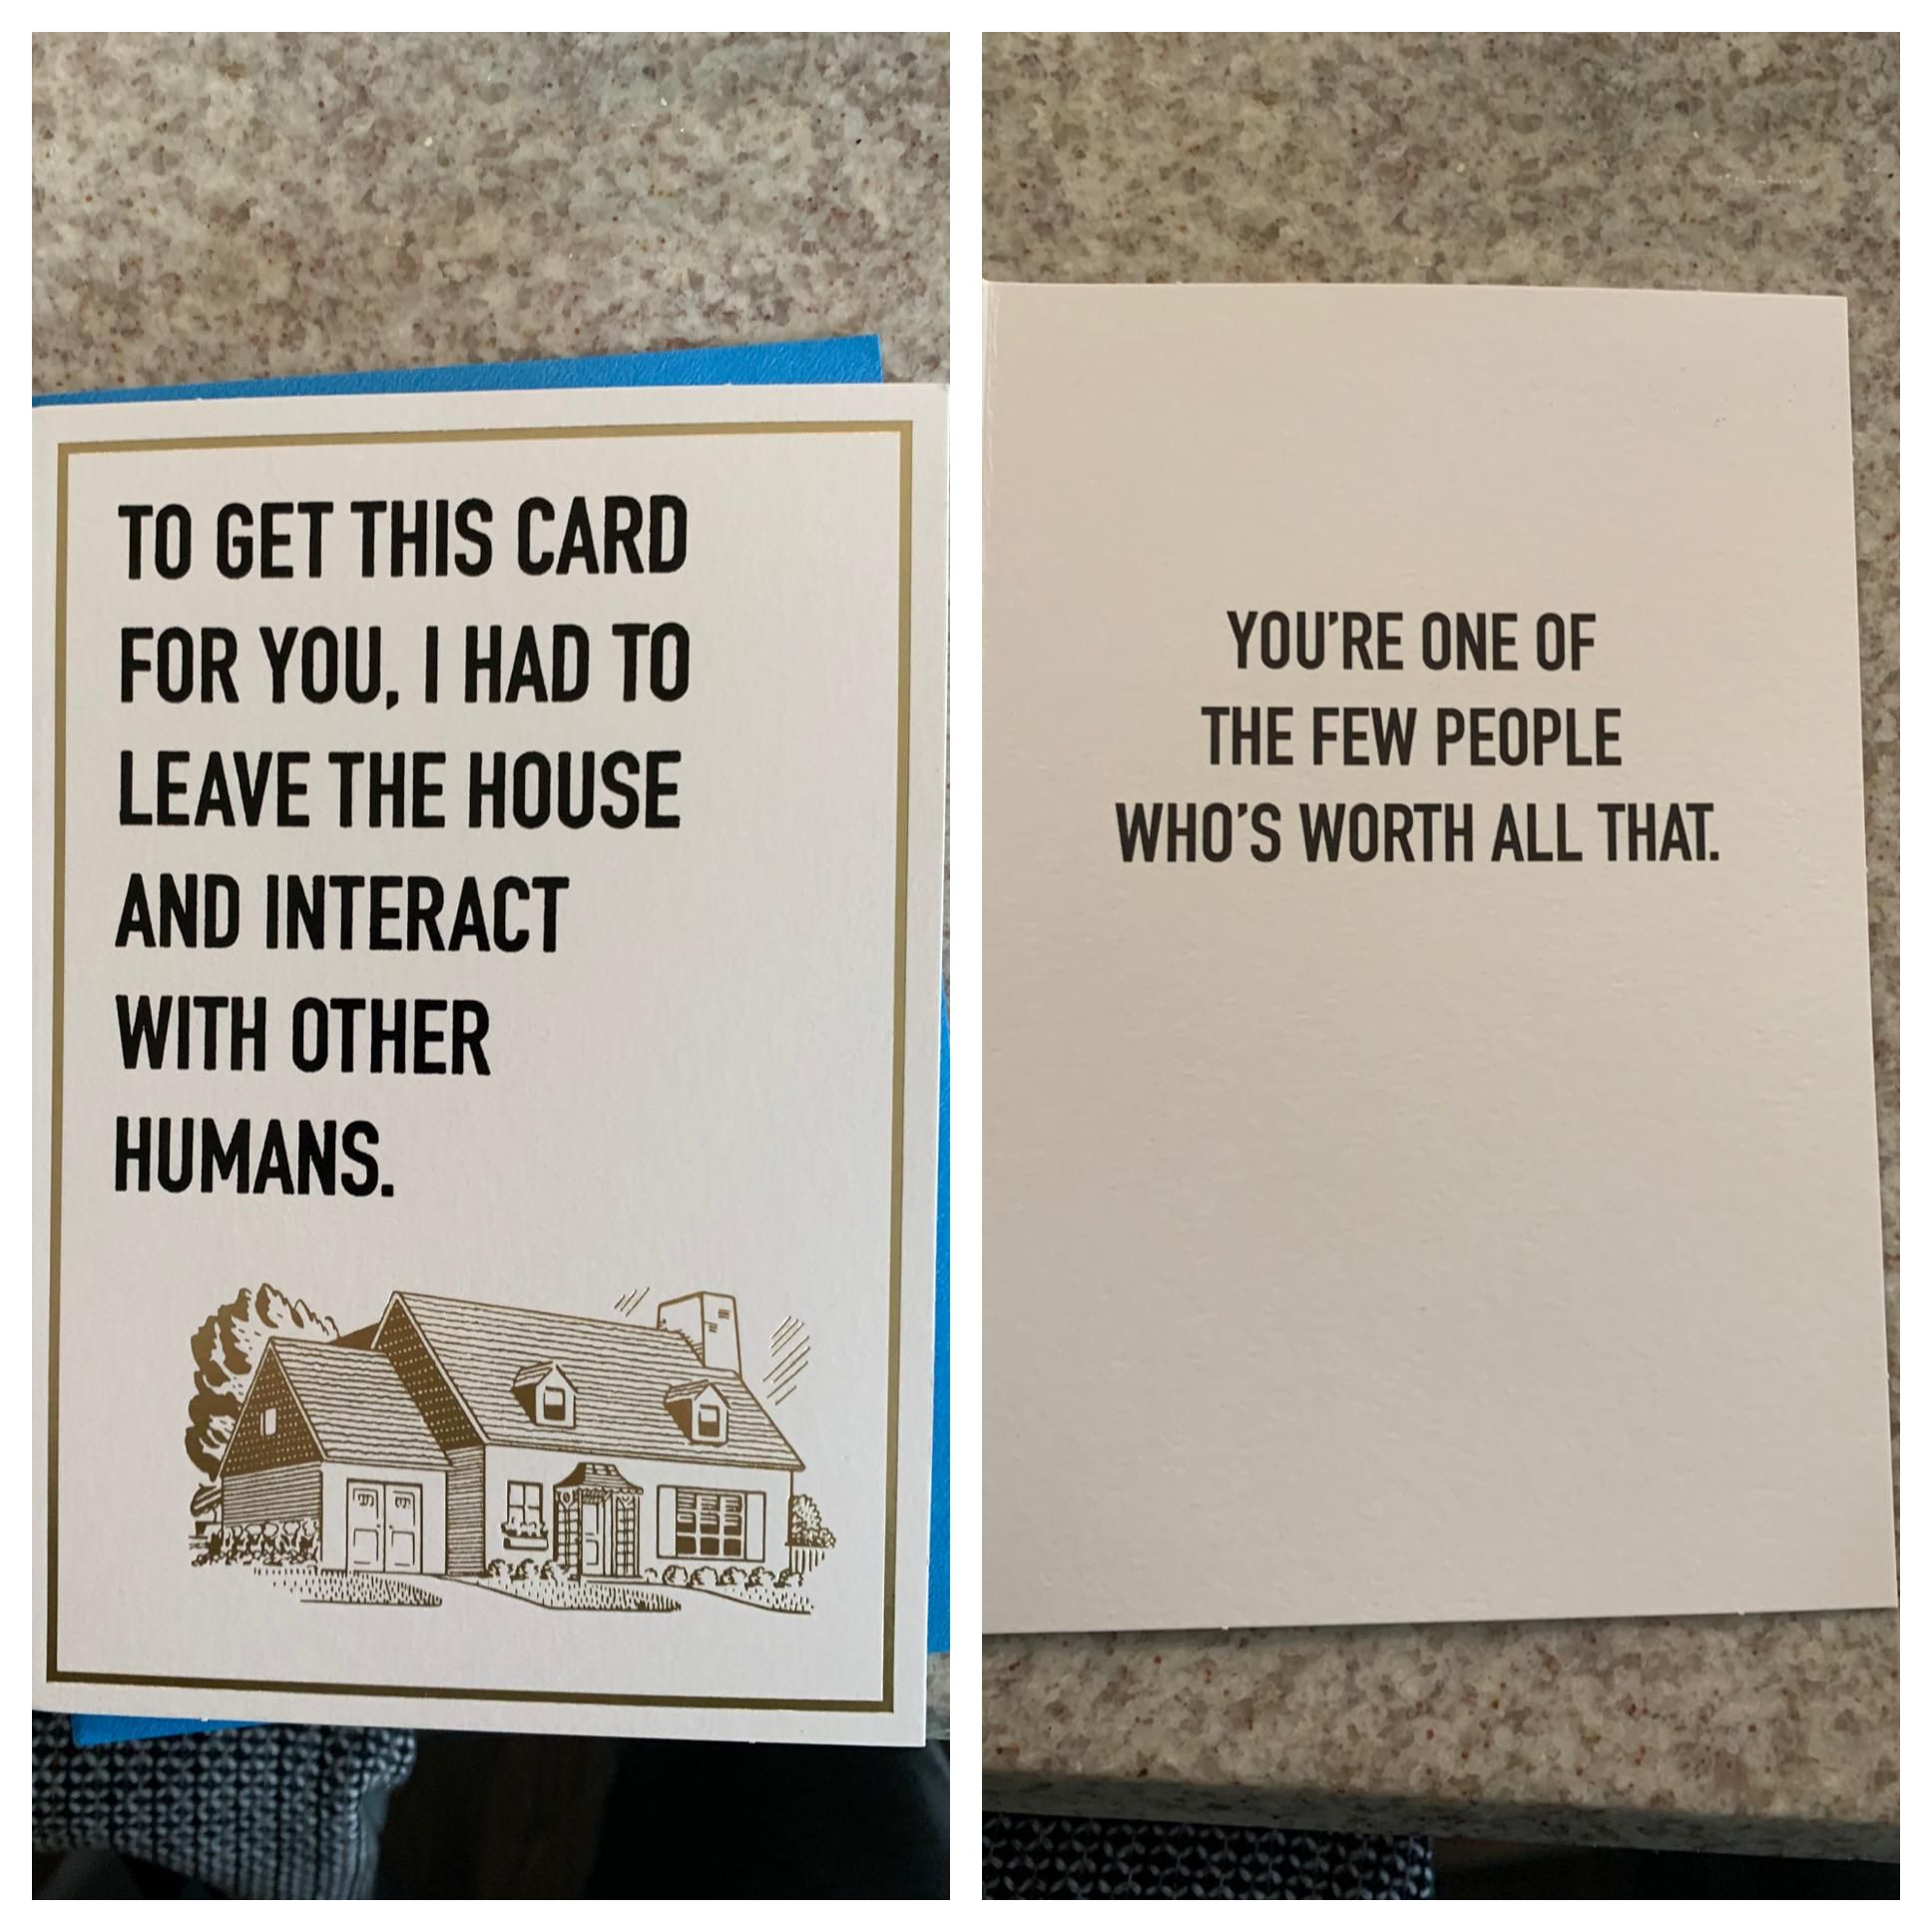 My dad found a very appropriate card for my cousin’s birthday today